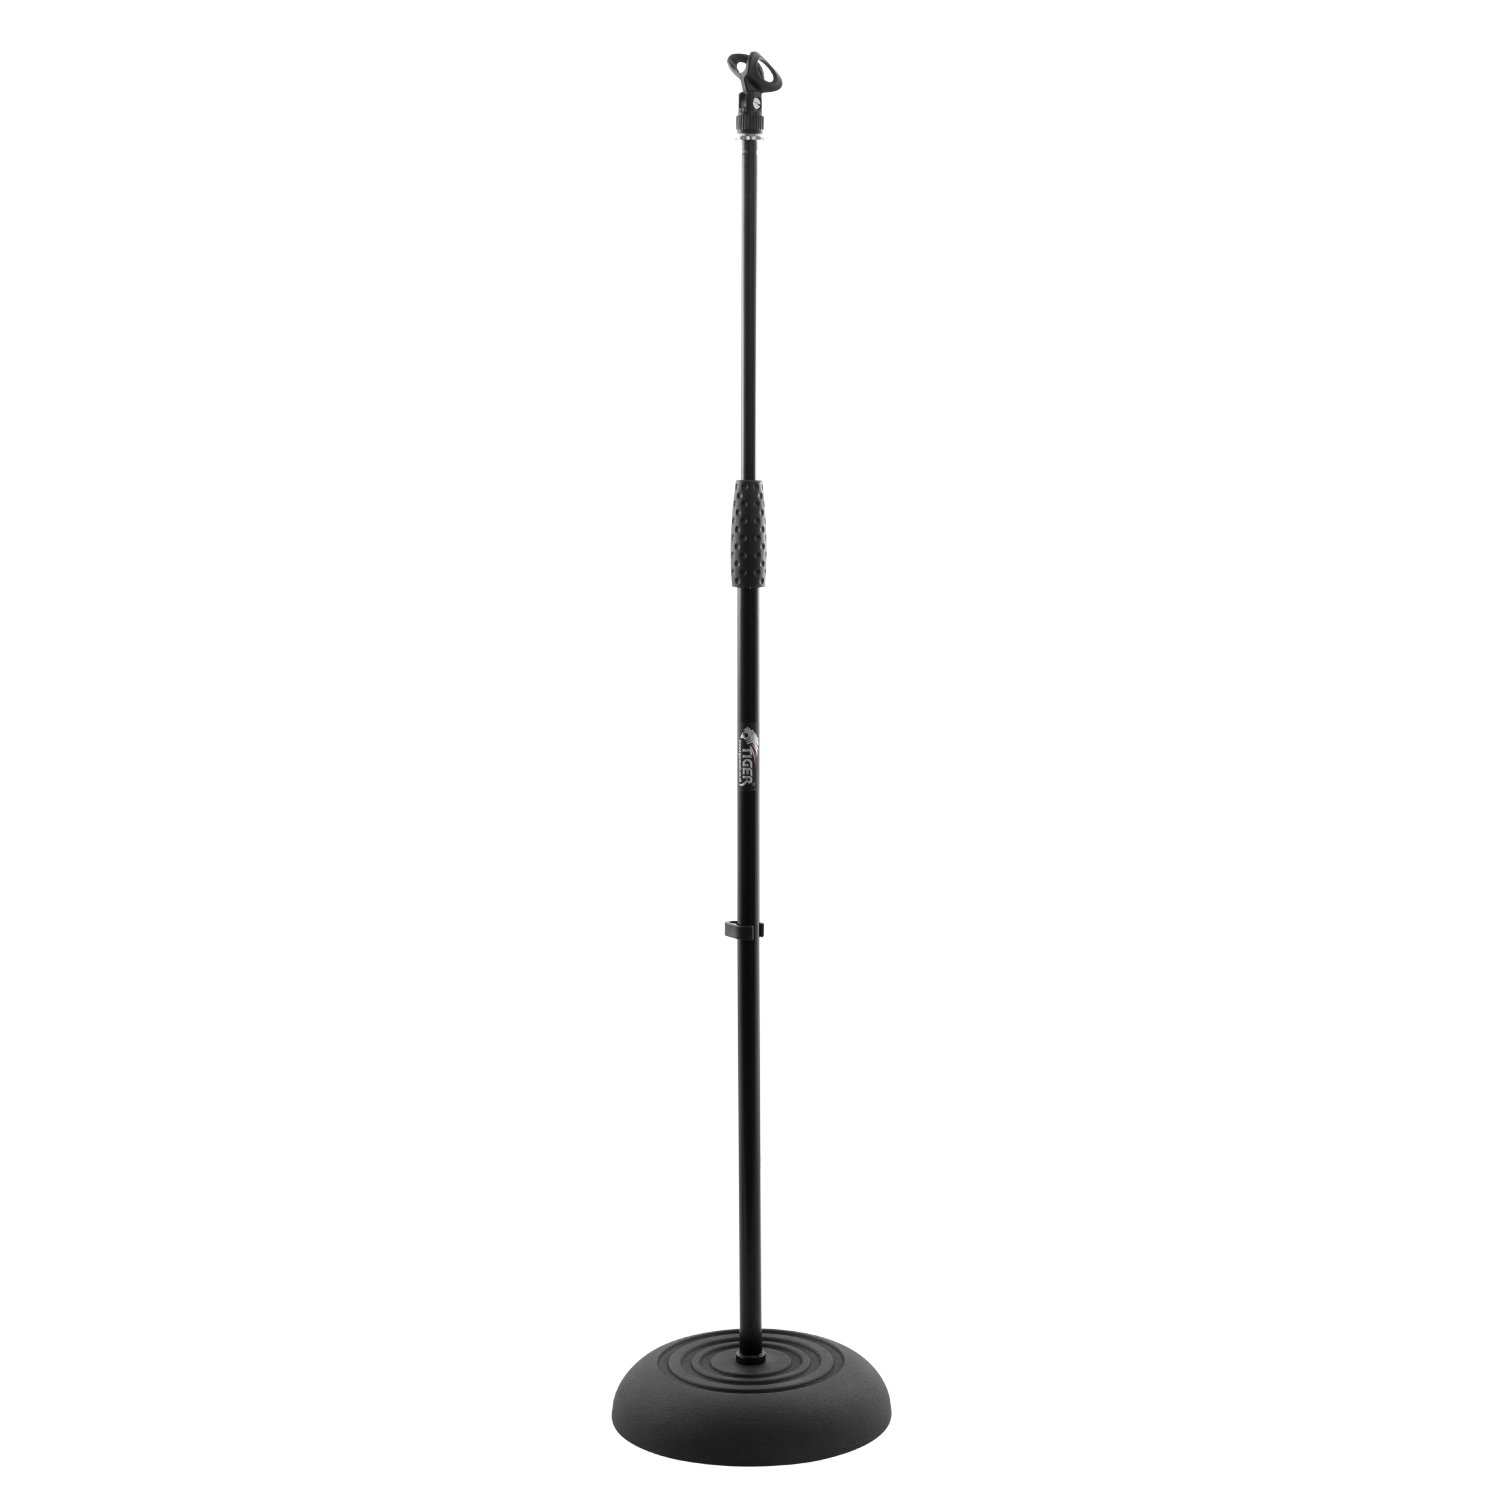 Abordable Tiger MCA14-BK Pied de Microphone - Base Rond